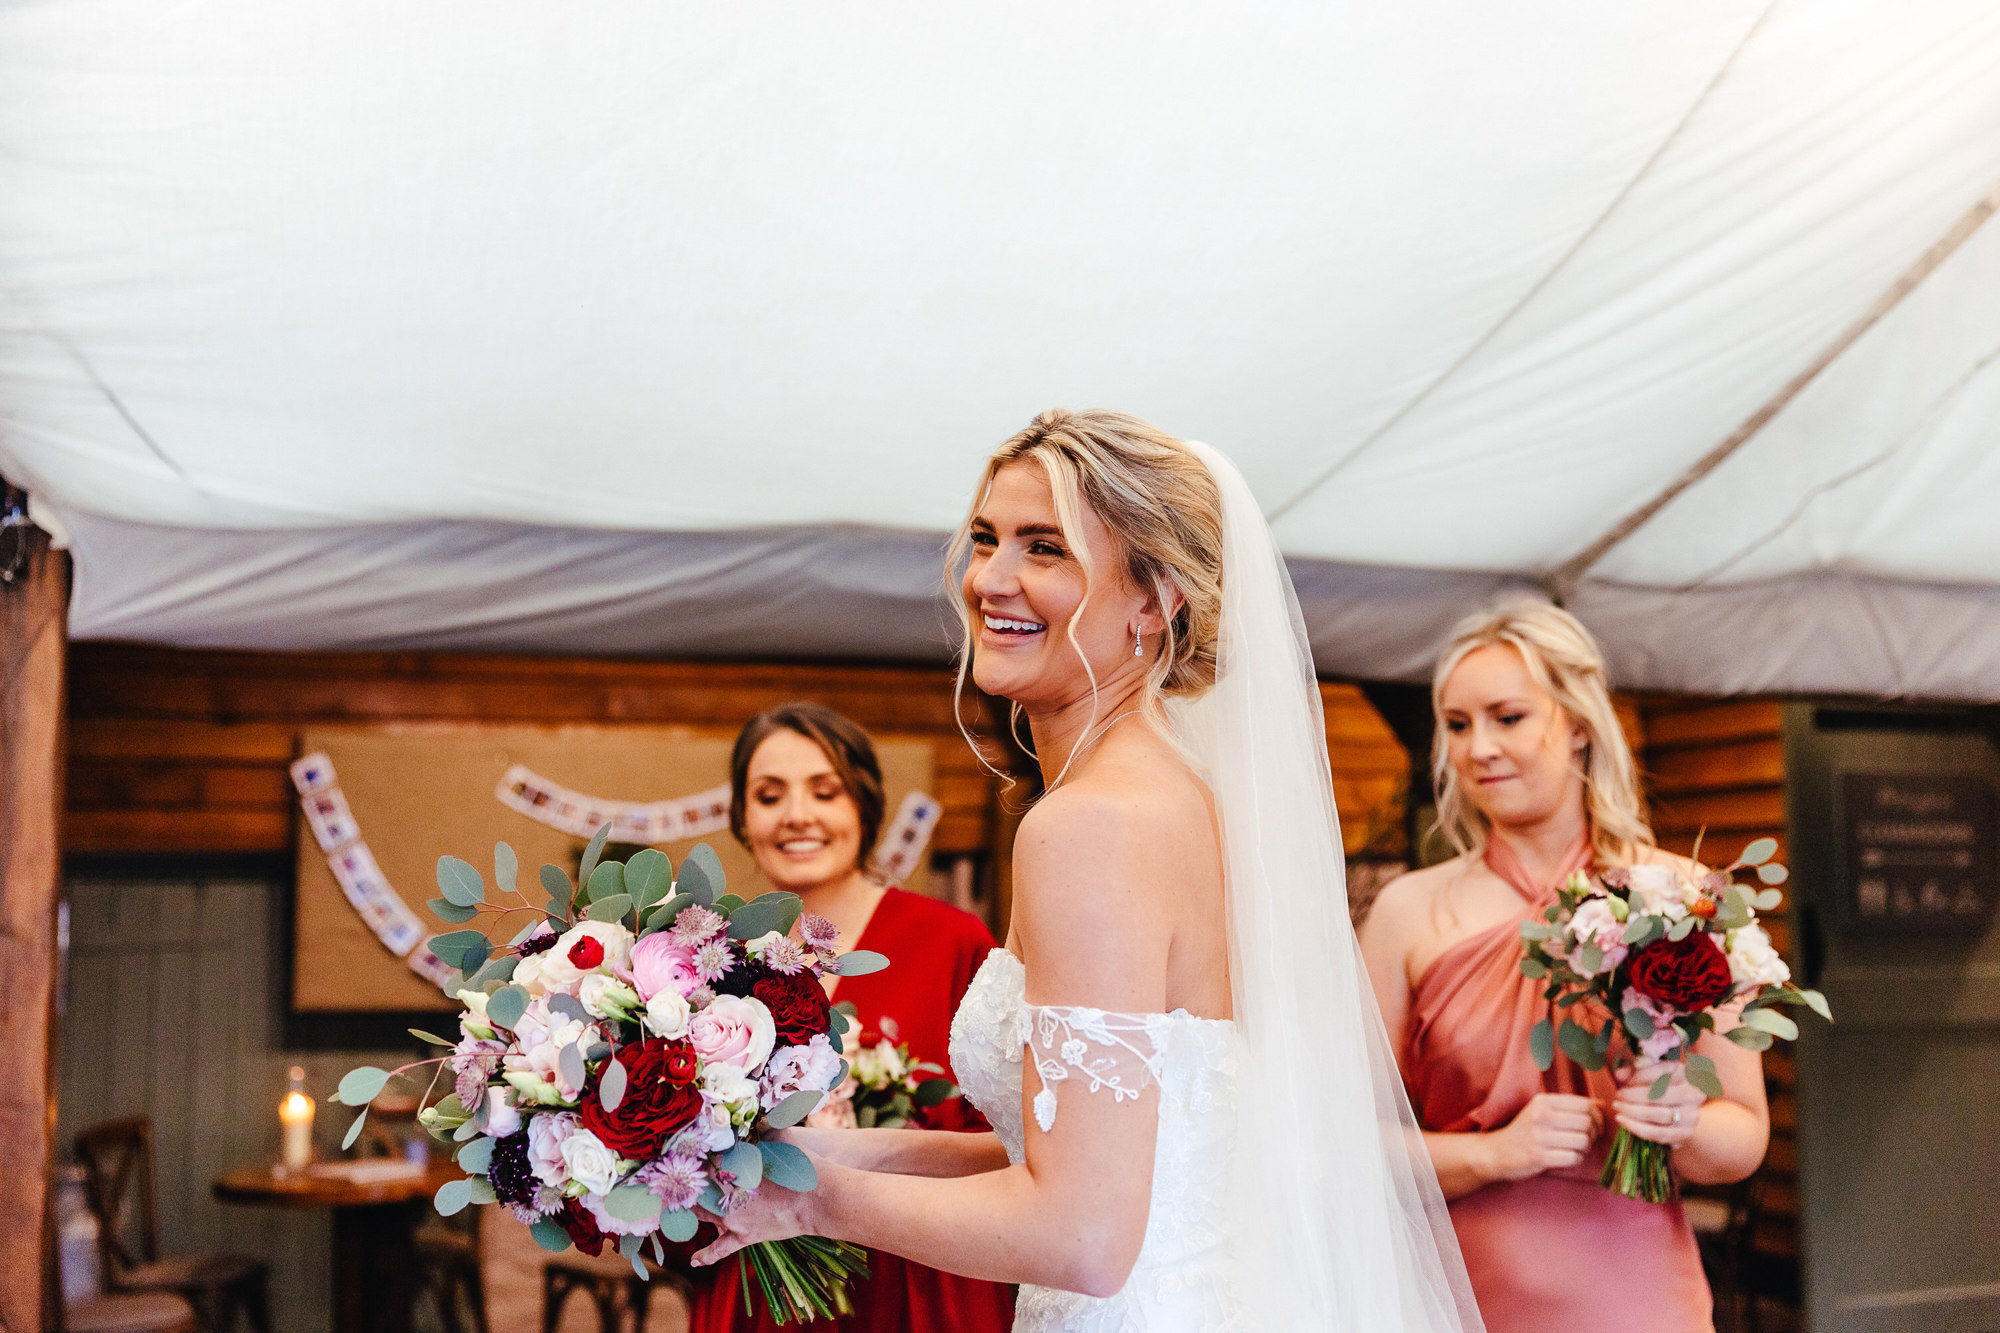 I capture the natural moments as a Devon wedding photographer